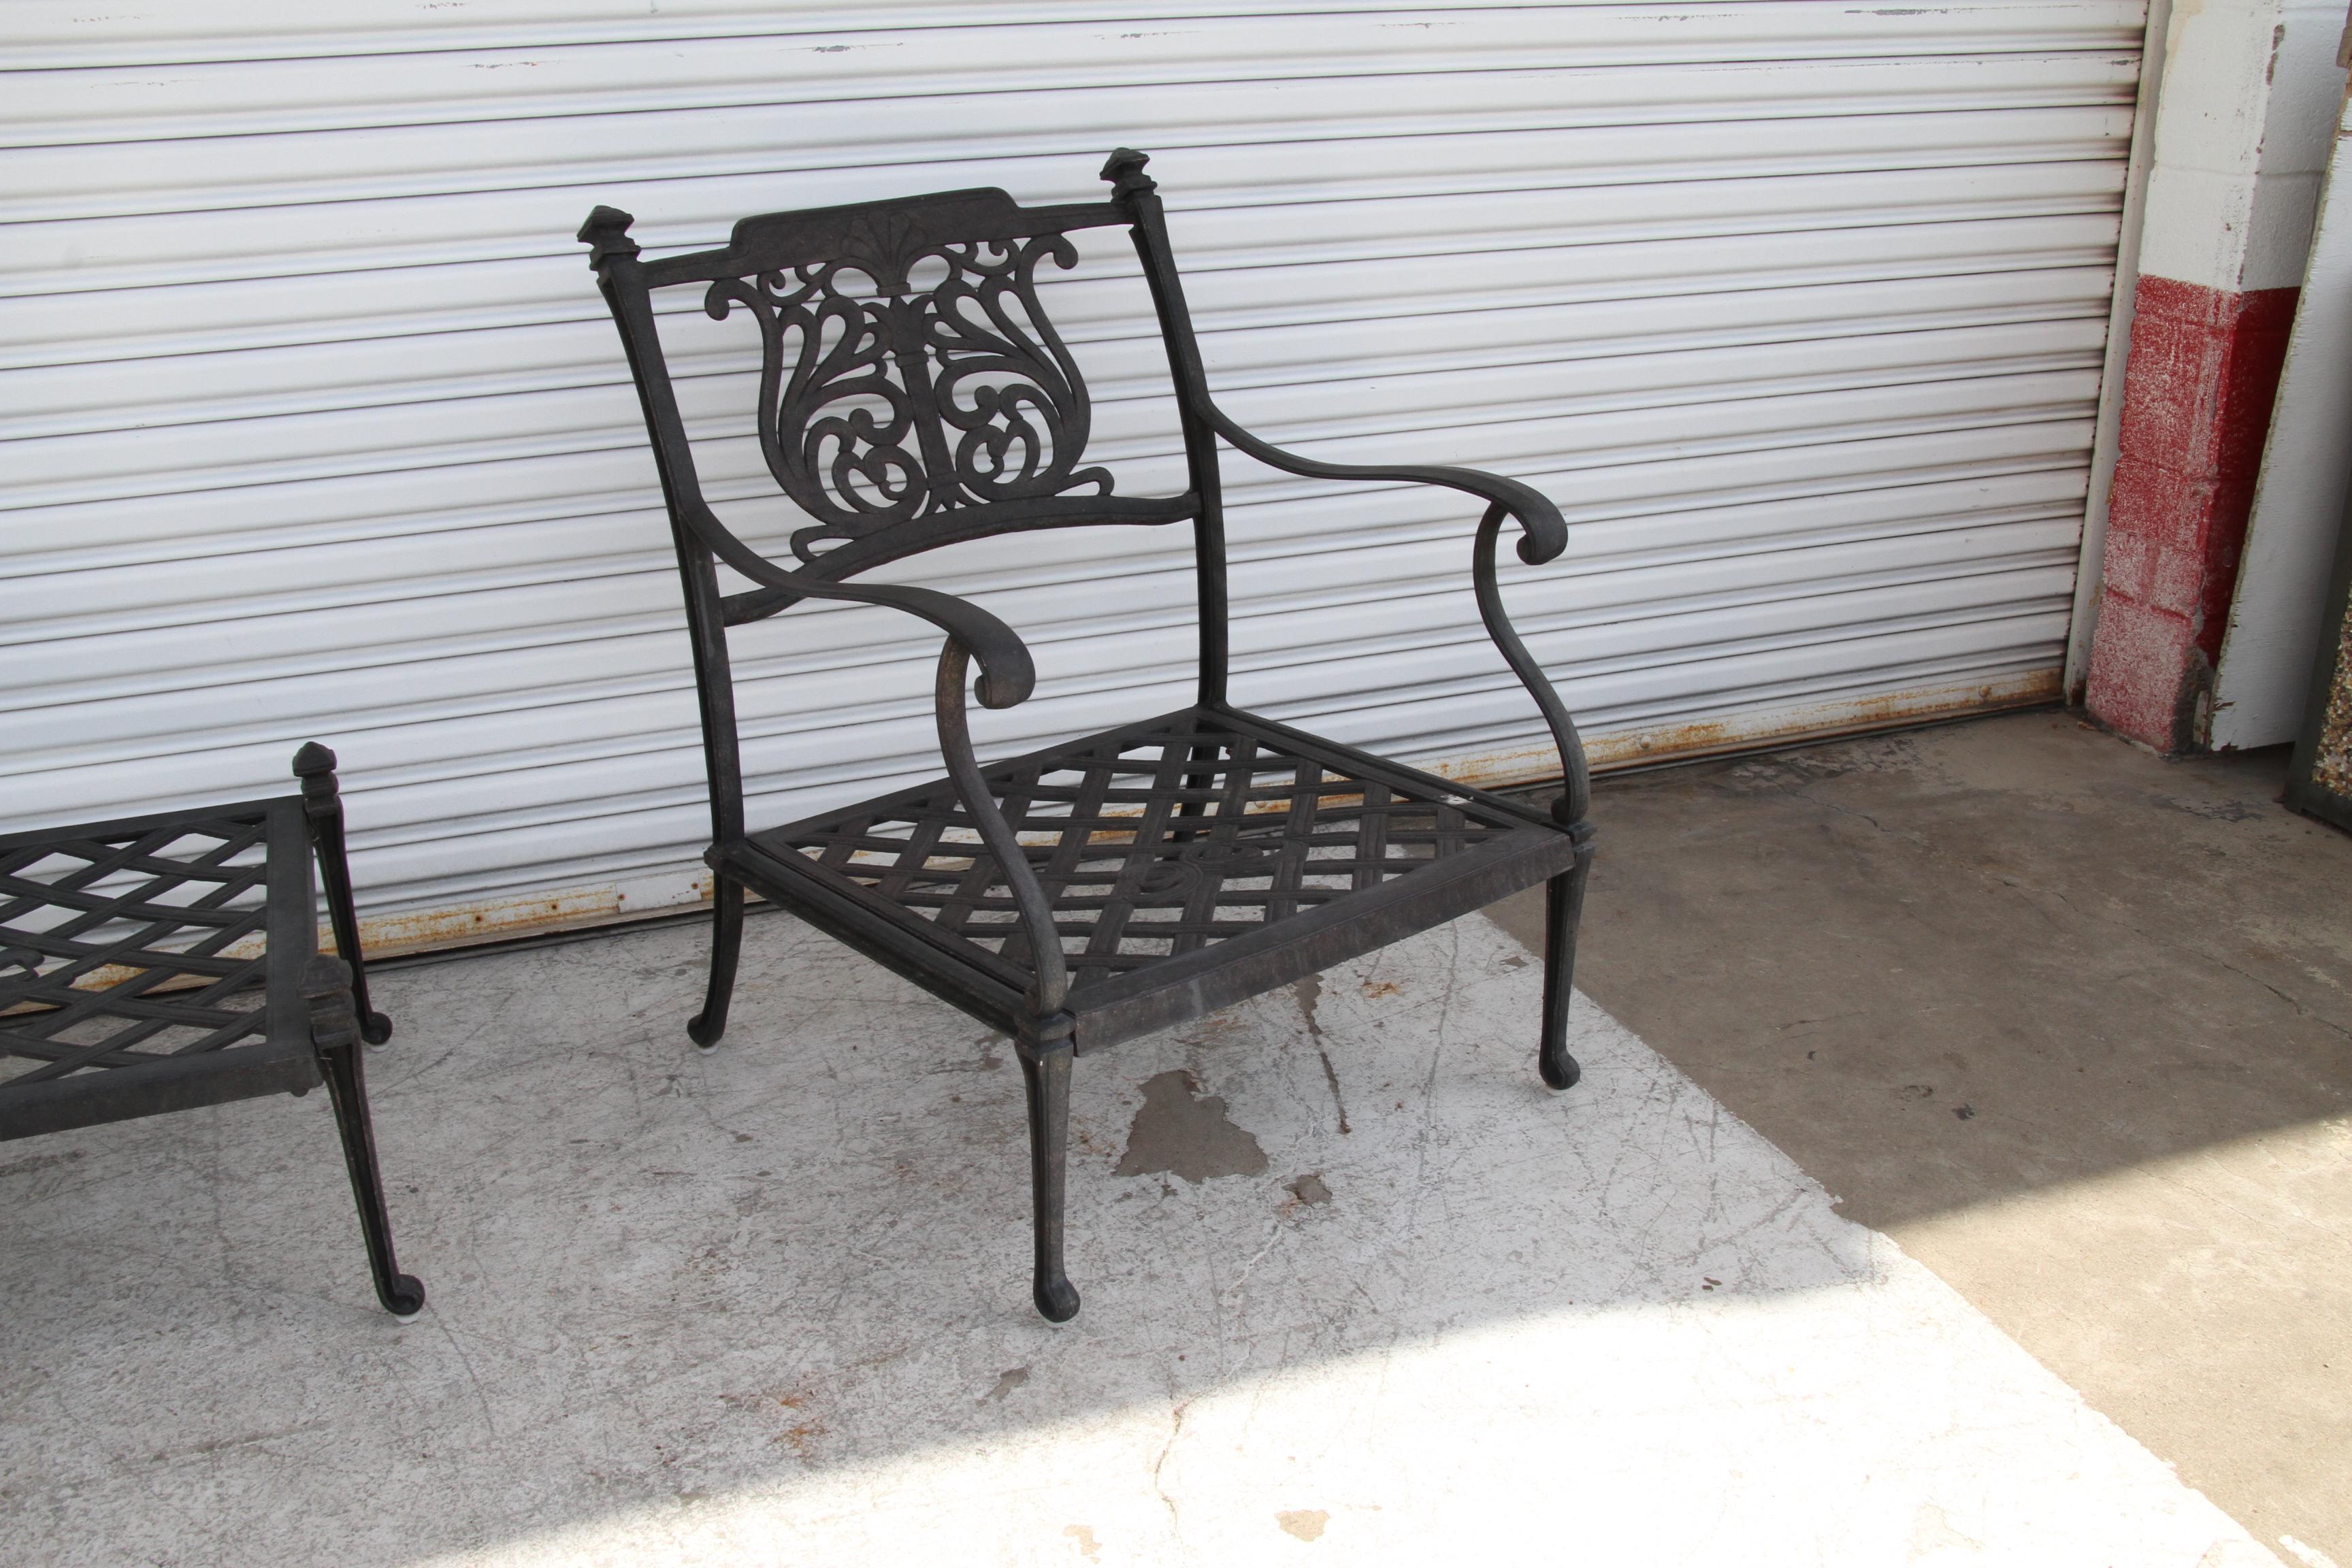 Patio set features a durable powder coated finish that will weather the harshest of outdoor conditions. Chairs and ottoman feature canvas sky blue cushions. Sand-cast aluminum frame ornamented with skillfully carved floral designs and lattice